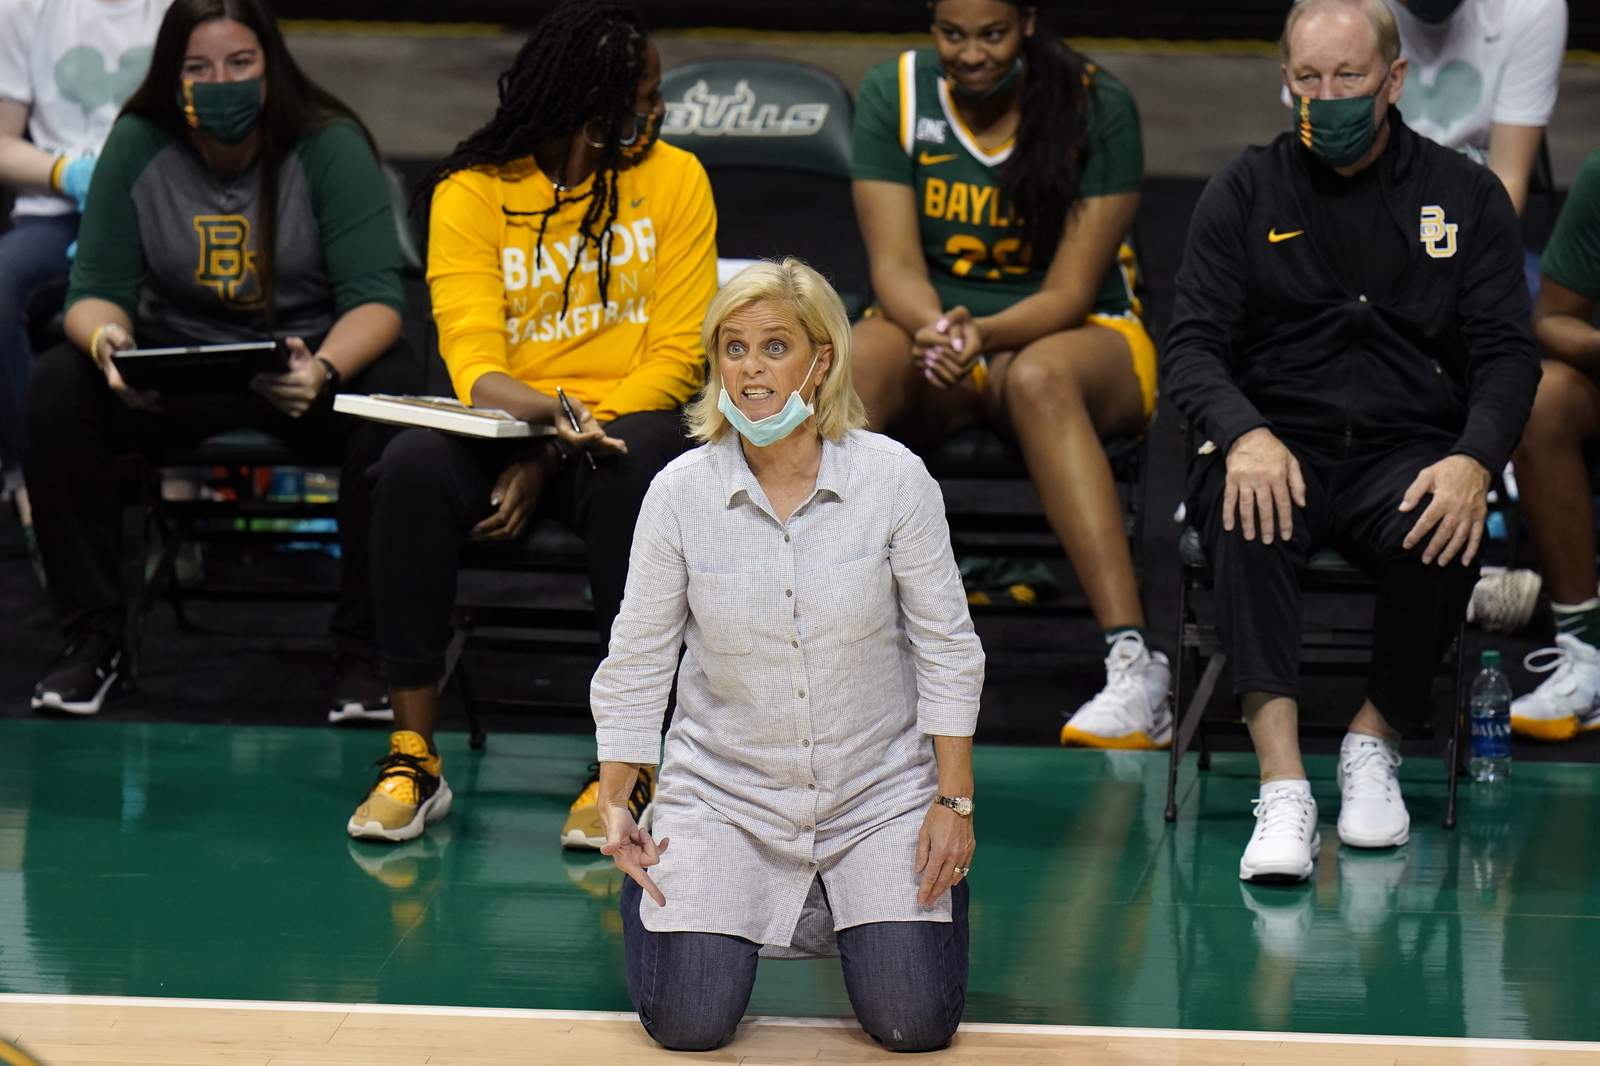 Mulkey positive for COVID-19, UConn-Baylor women's game off